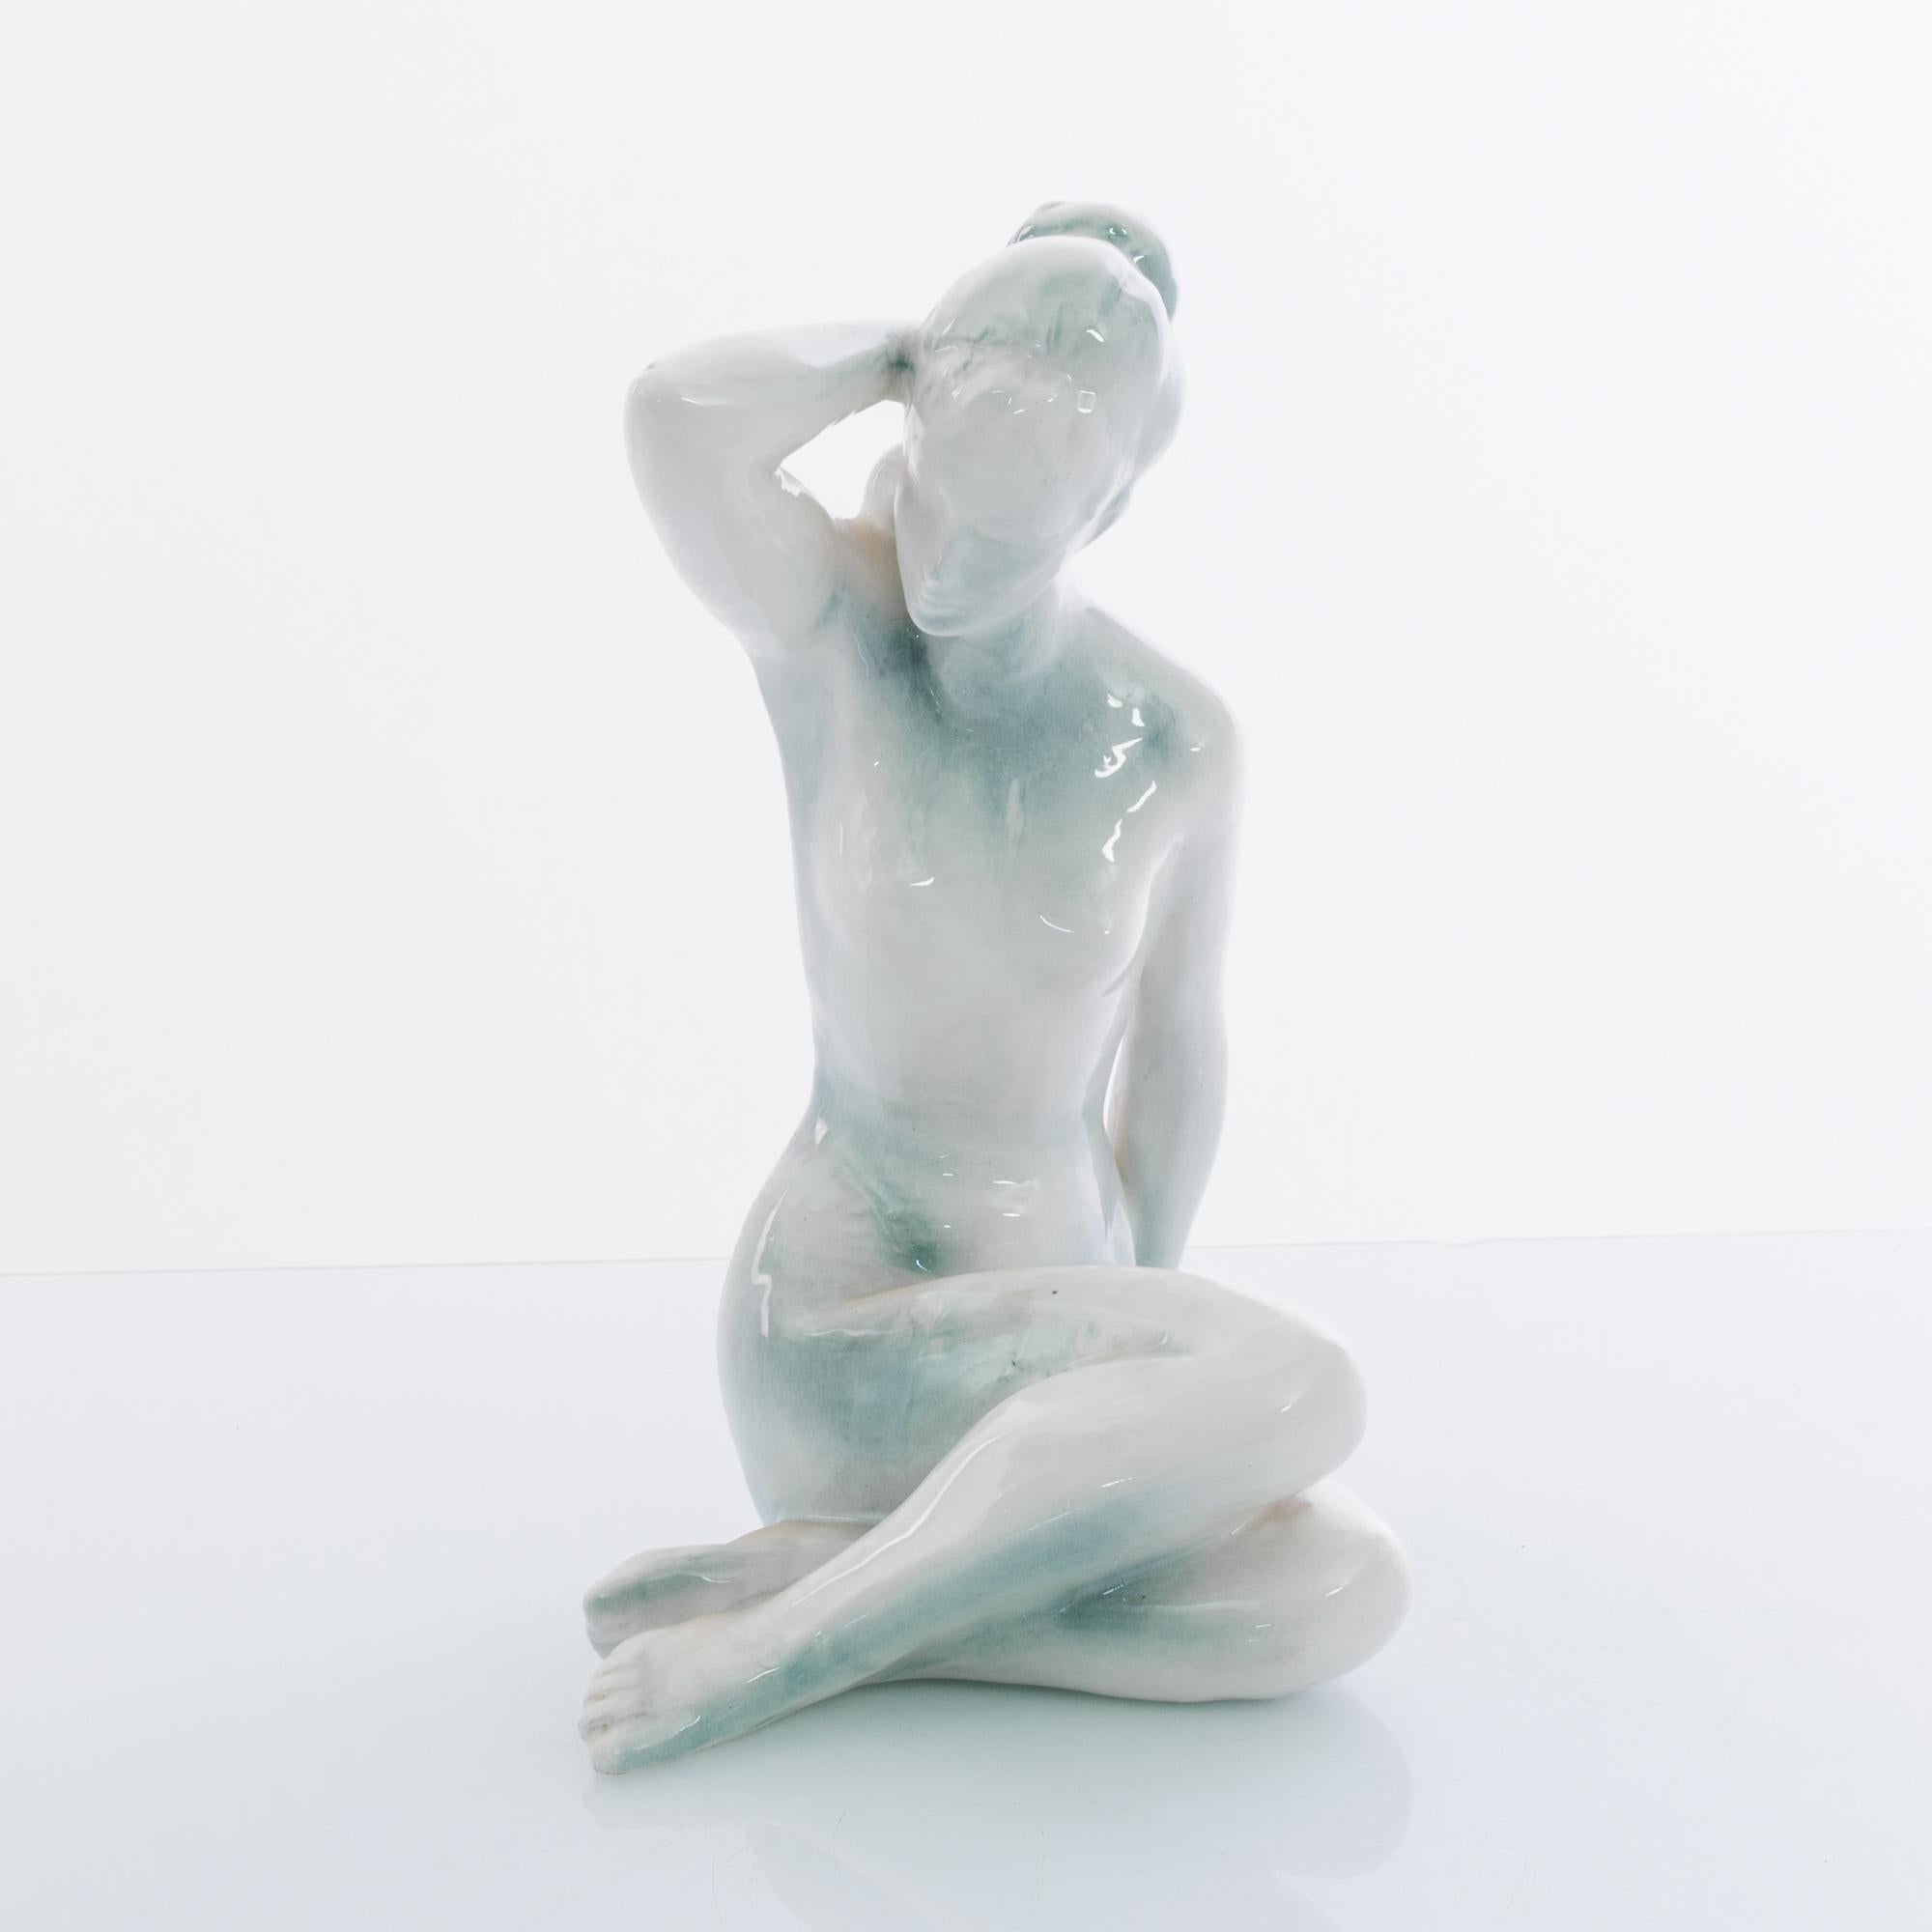 A ceramic statue from Czechia, circa 1950, depicted a naked woman. The natural pose and glossy glaze of the white ceramic create an impression of calm and simplicity; the shadow of blue glaze which runs across the surface gives depth and definition